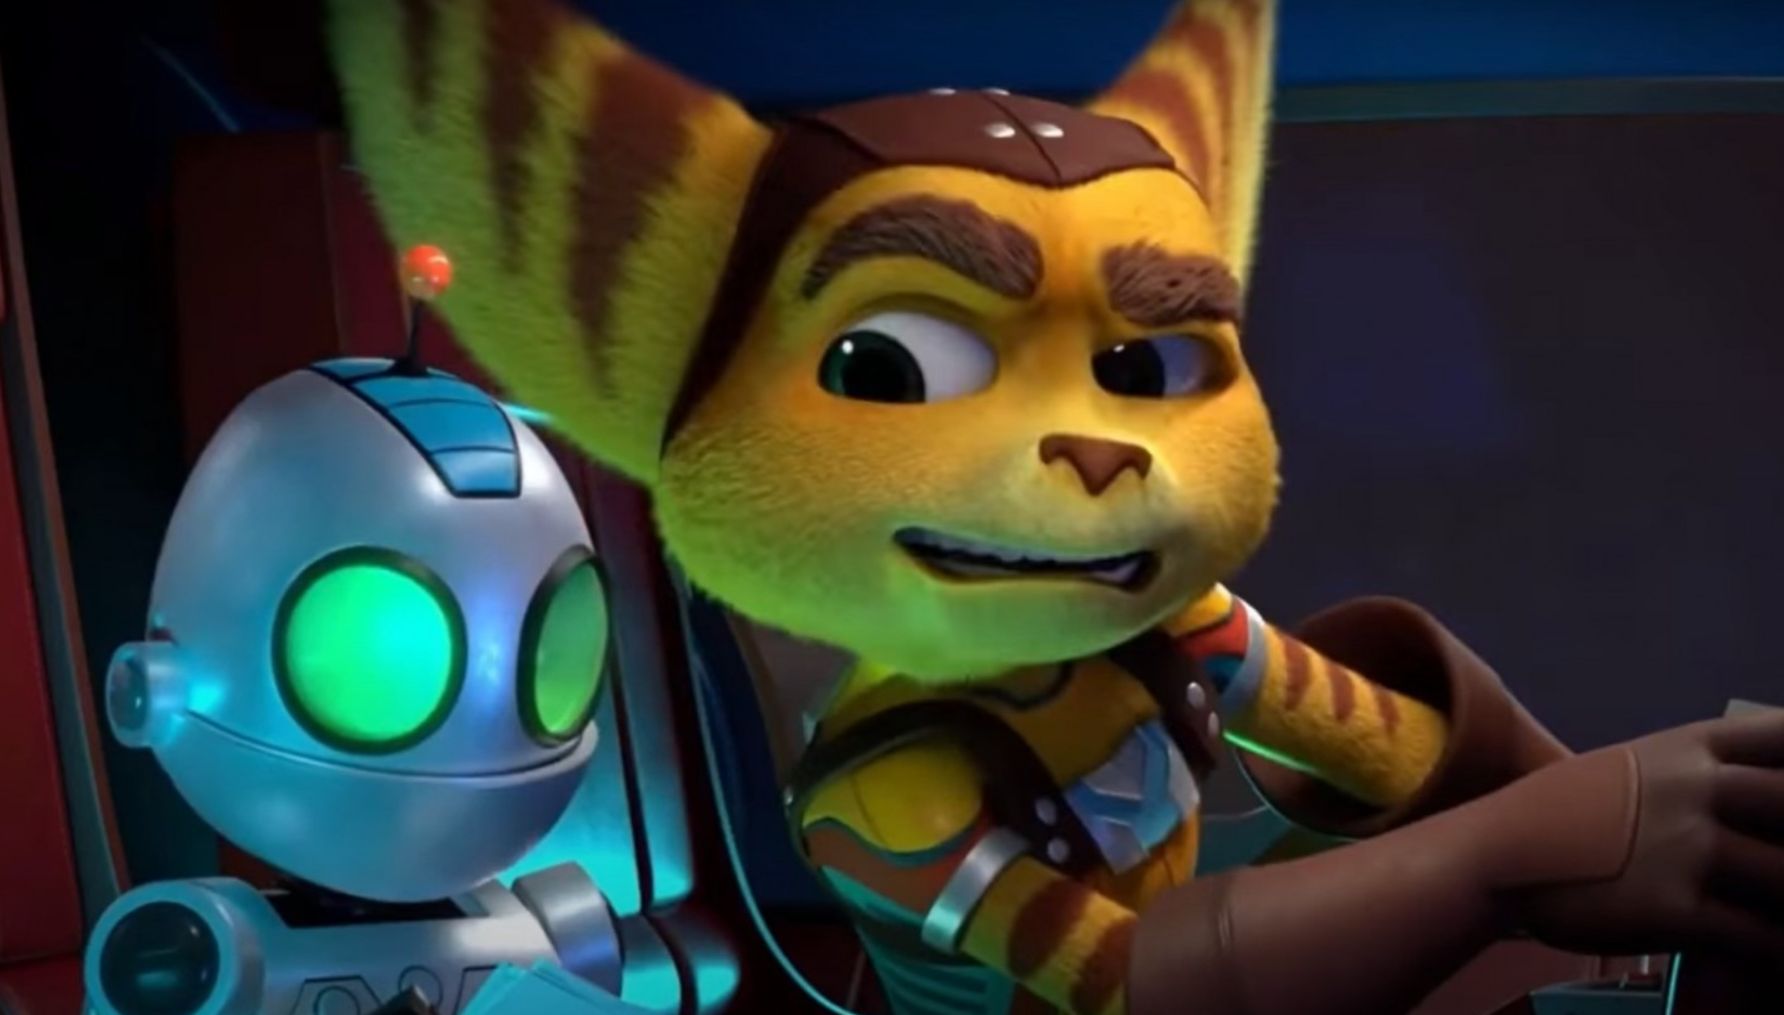 Ratchet & Clank - Most Iconic Video Game Duos of All Time